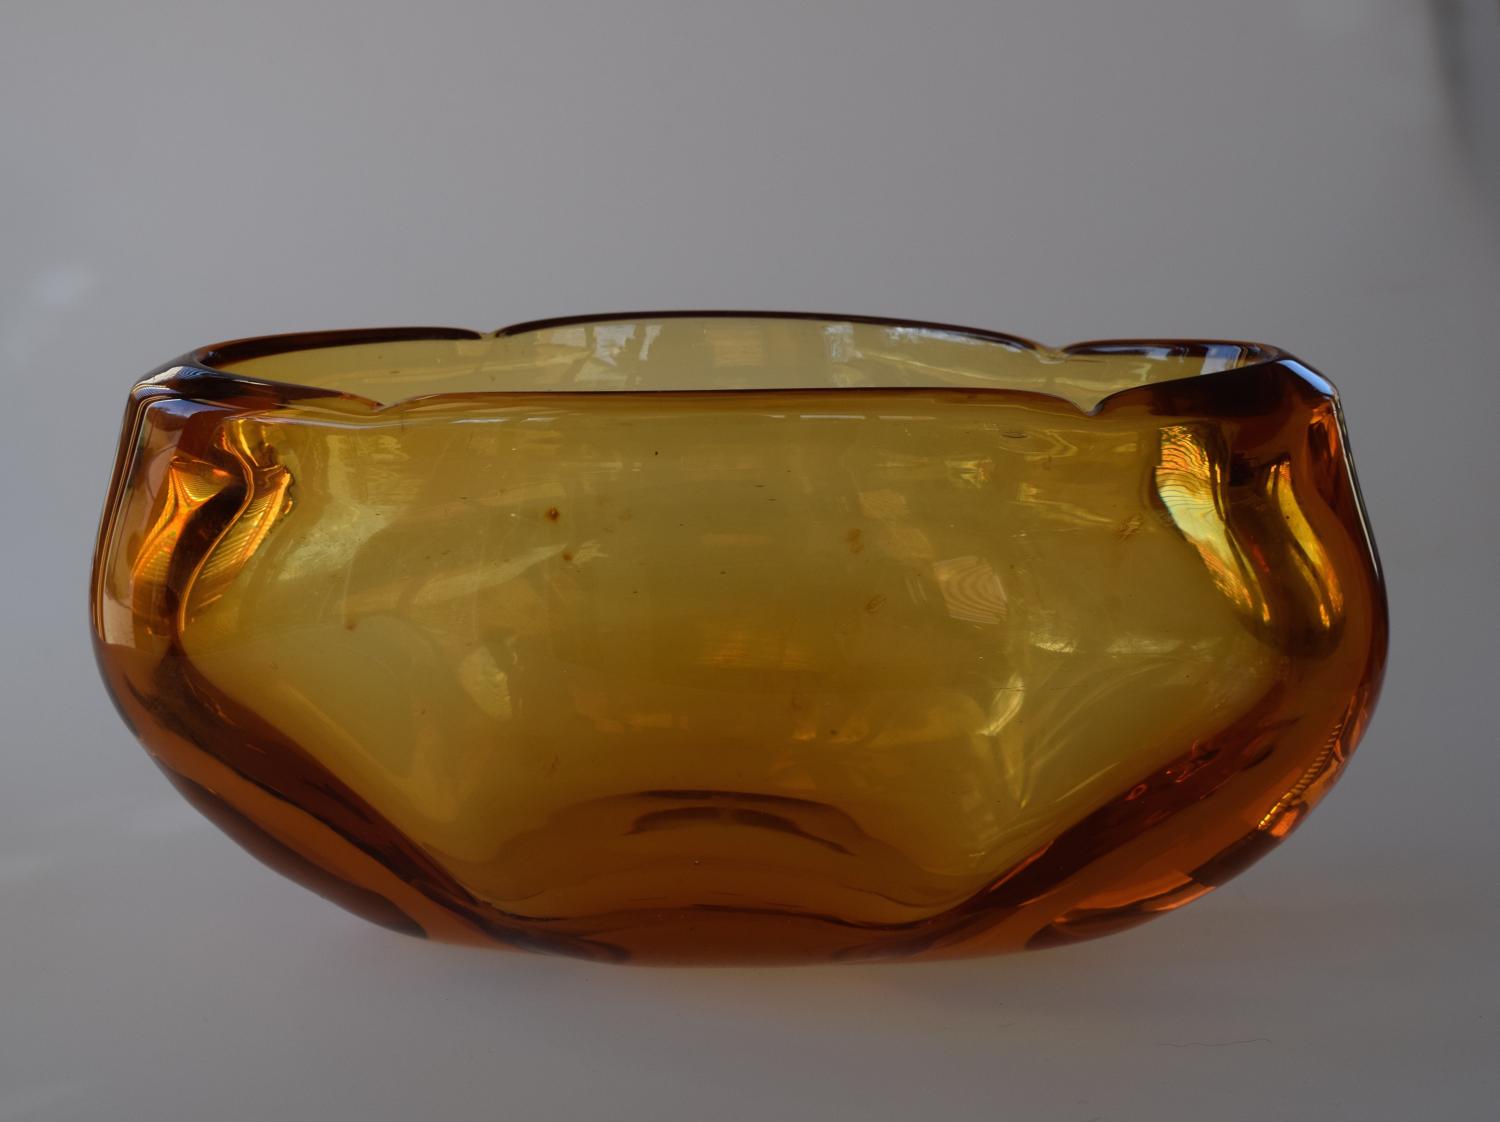 Amber oval bowl by James Hogan, Whitefriars.